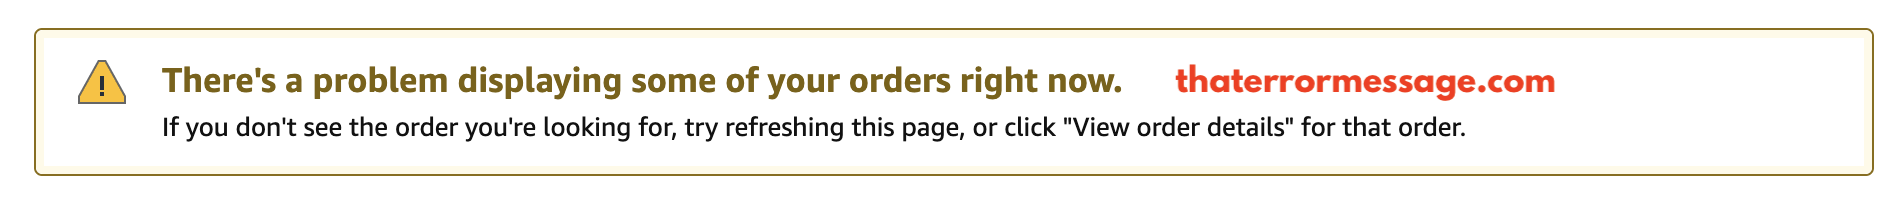 Amazon Theres A Problem With Some Of Your Orders Right Now